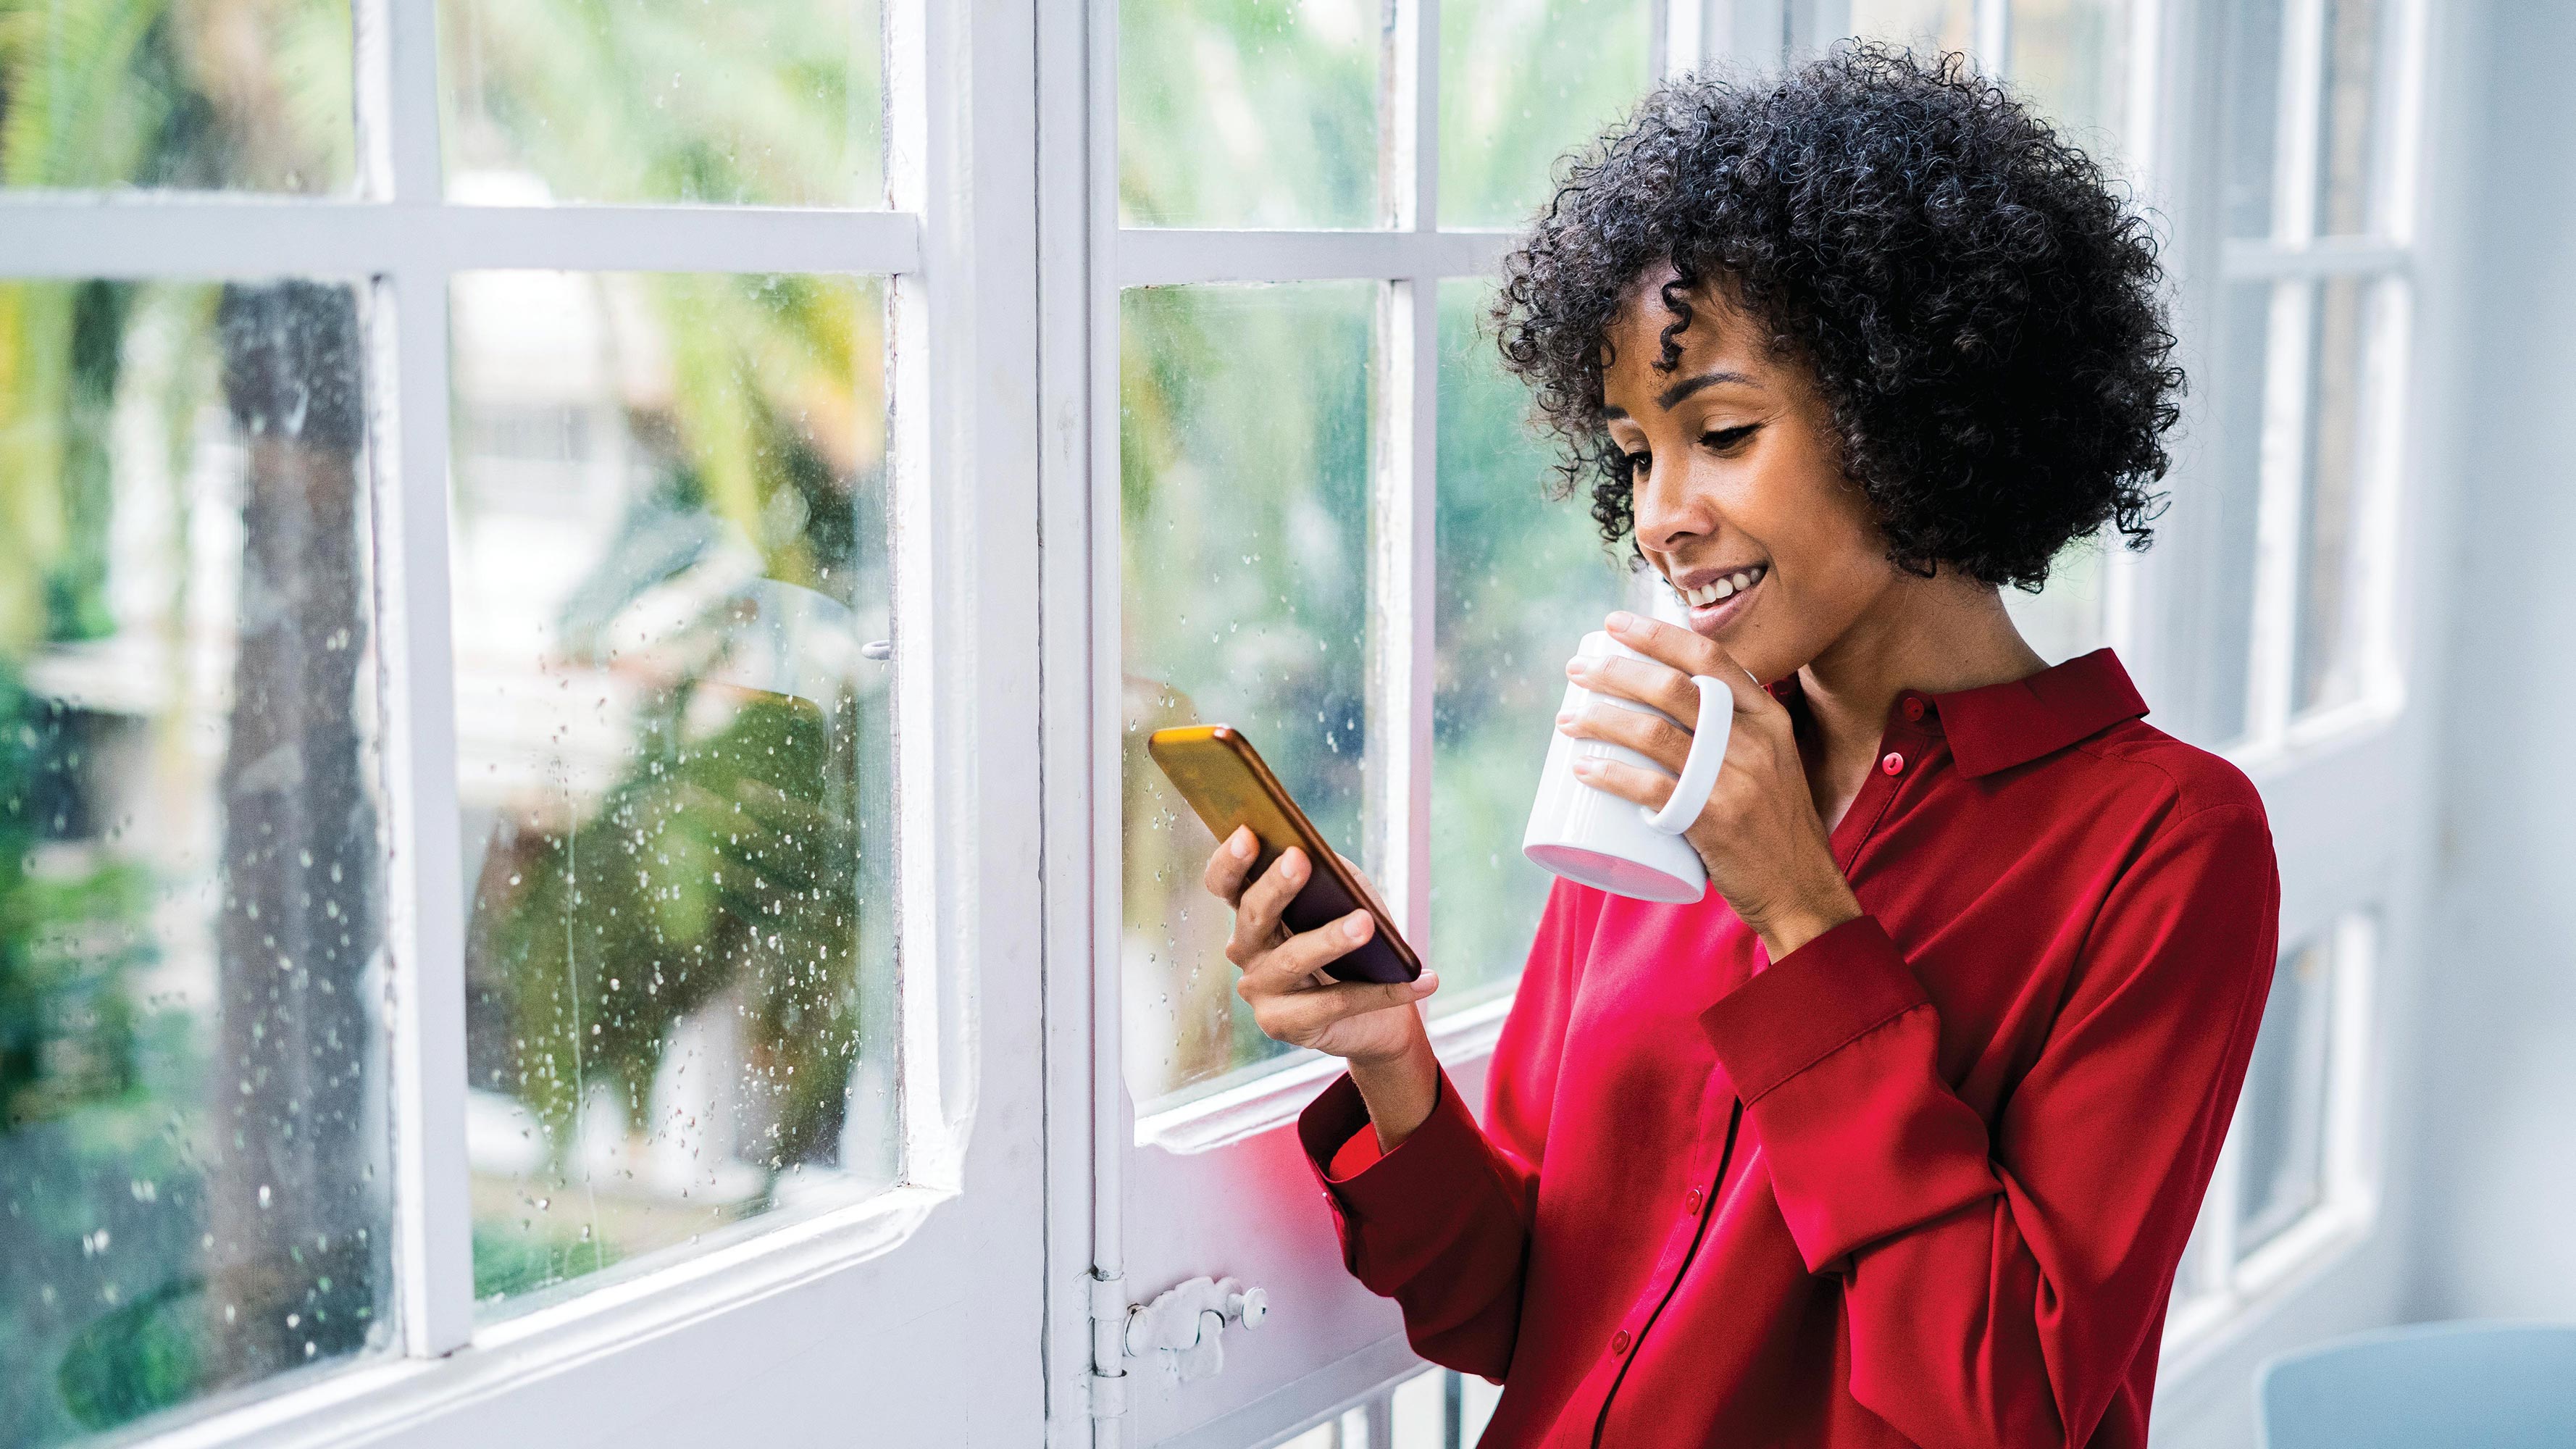 A young woman with curly hair, wearing a red button-down, collared shirt, stands by her window to drink coffee and scroll through her phone.